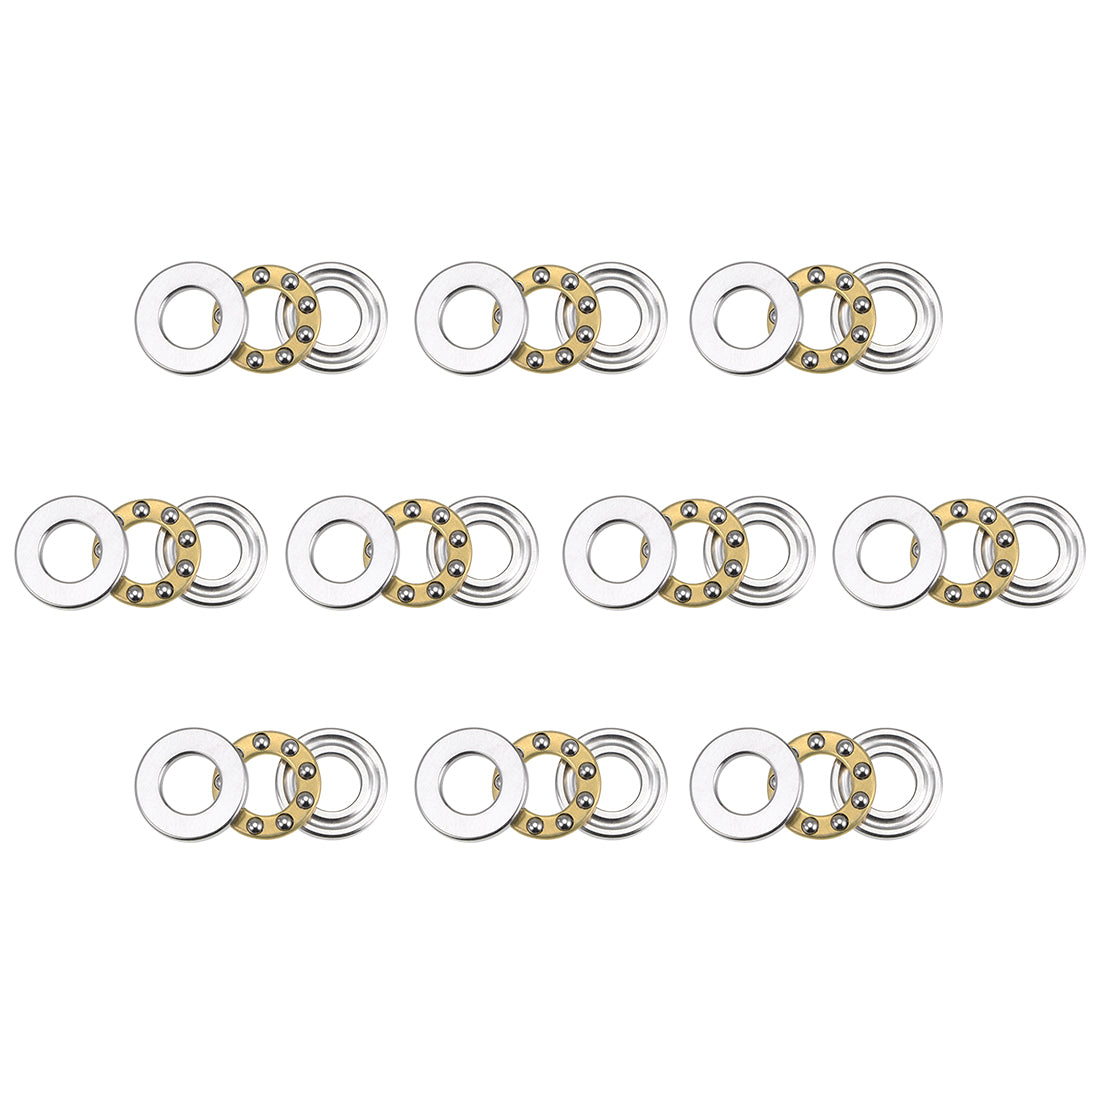 uxcell Uxcell F6-12M Miniature Thrust Ball Bearing 6x12x4.5mm Chrome Steel with Washer 10Pcs